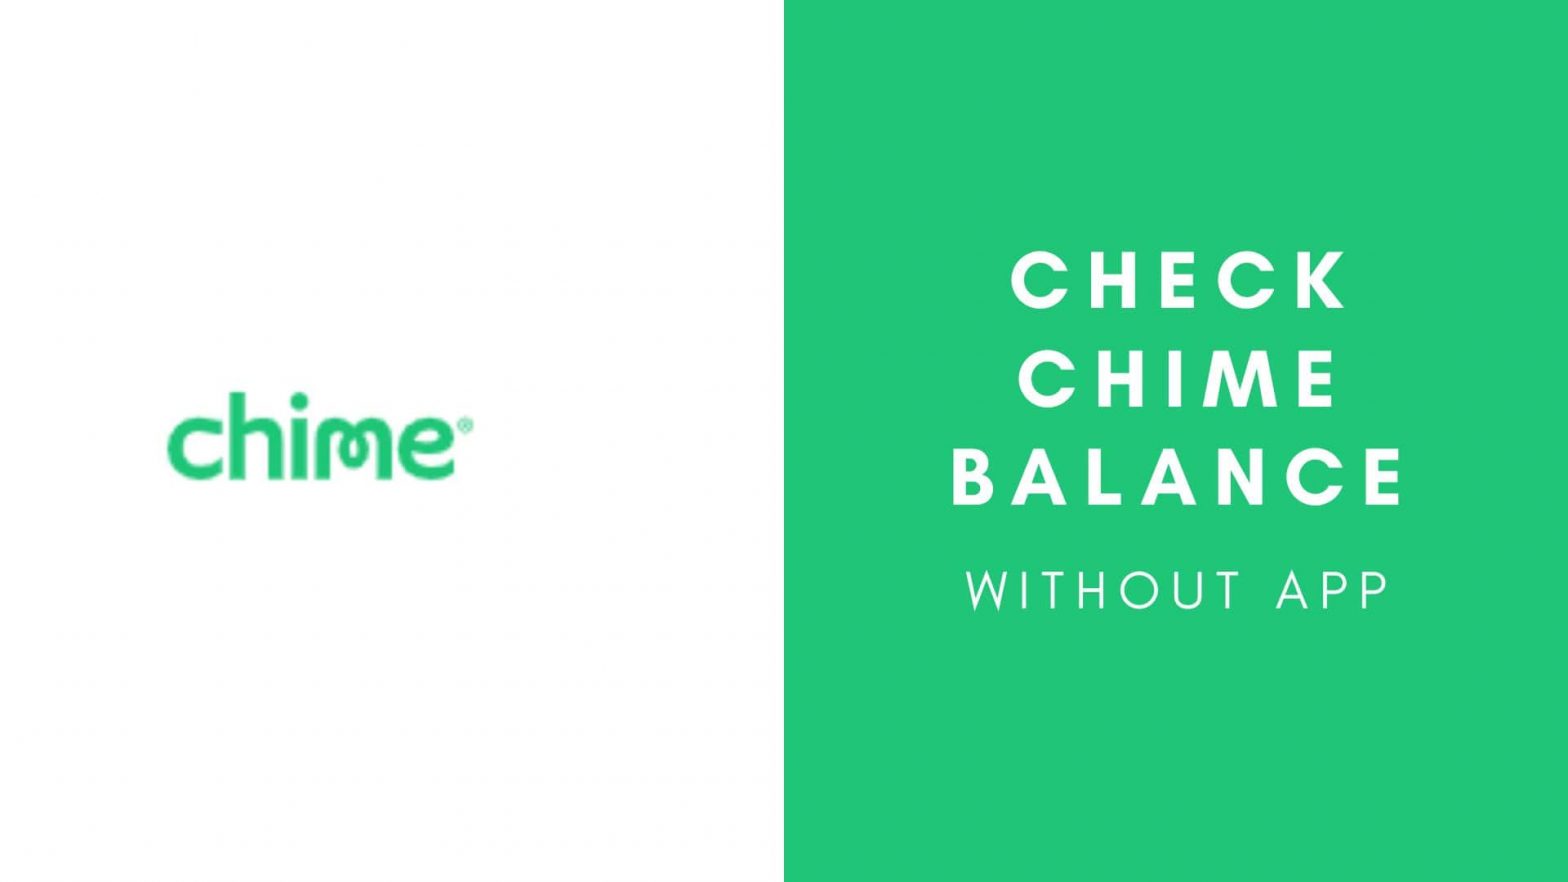 check chime balance without app-min